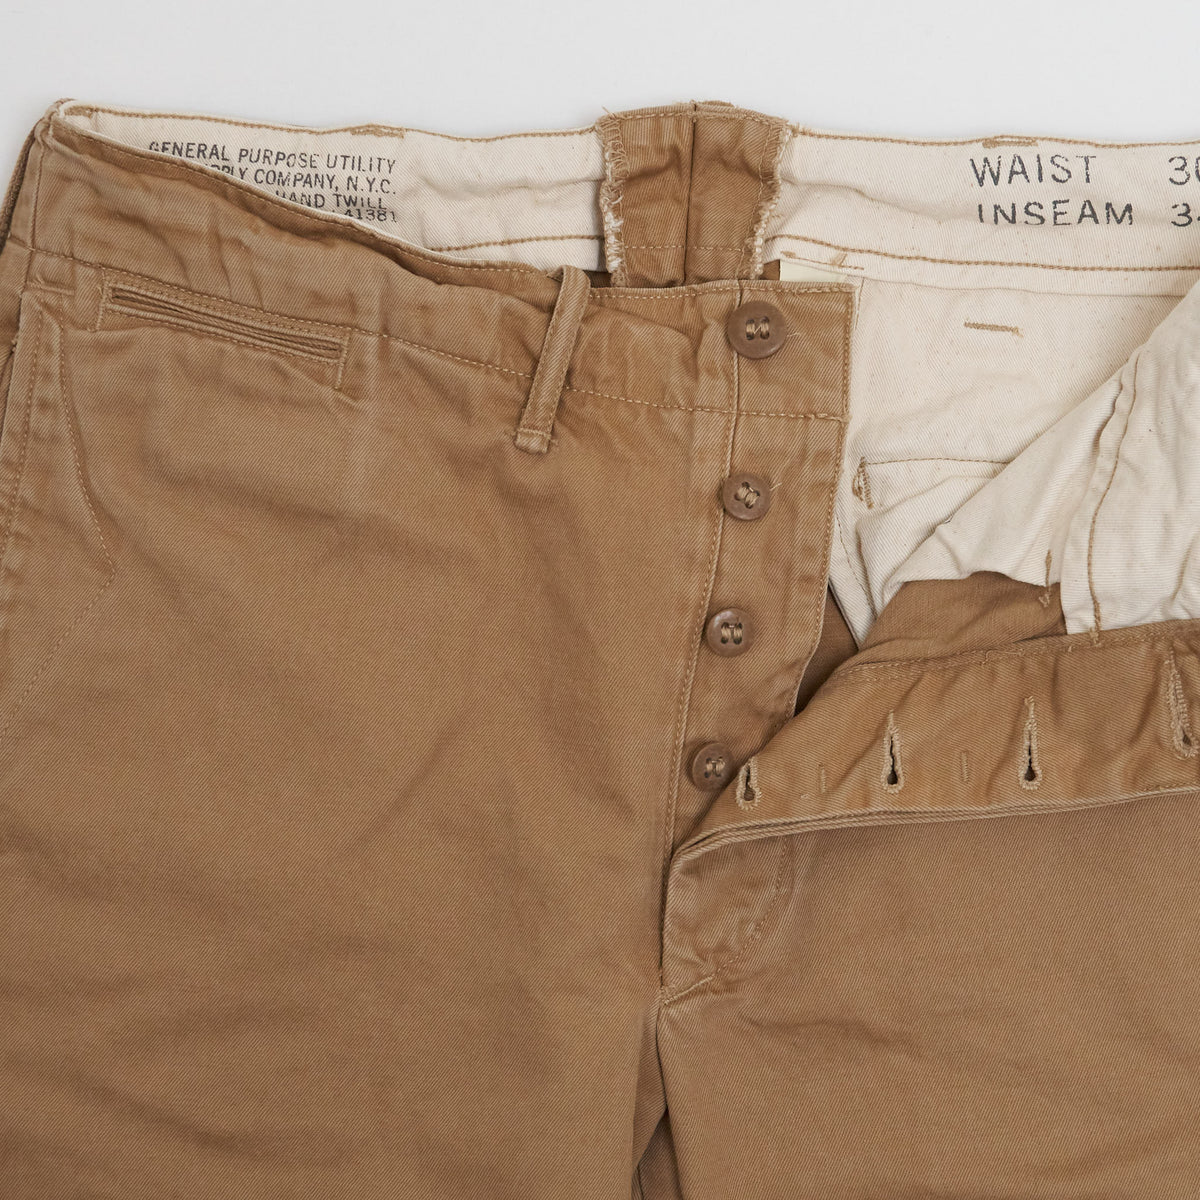 Double RL Officers Classic Chinos Regular - DeeCee style